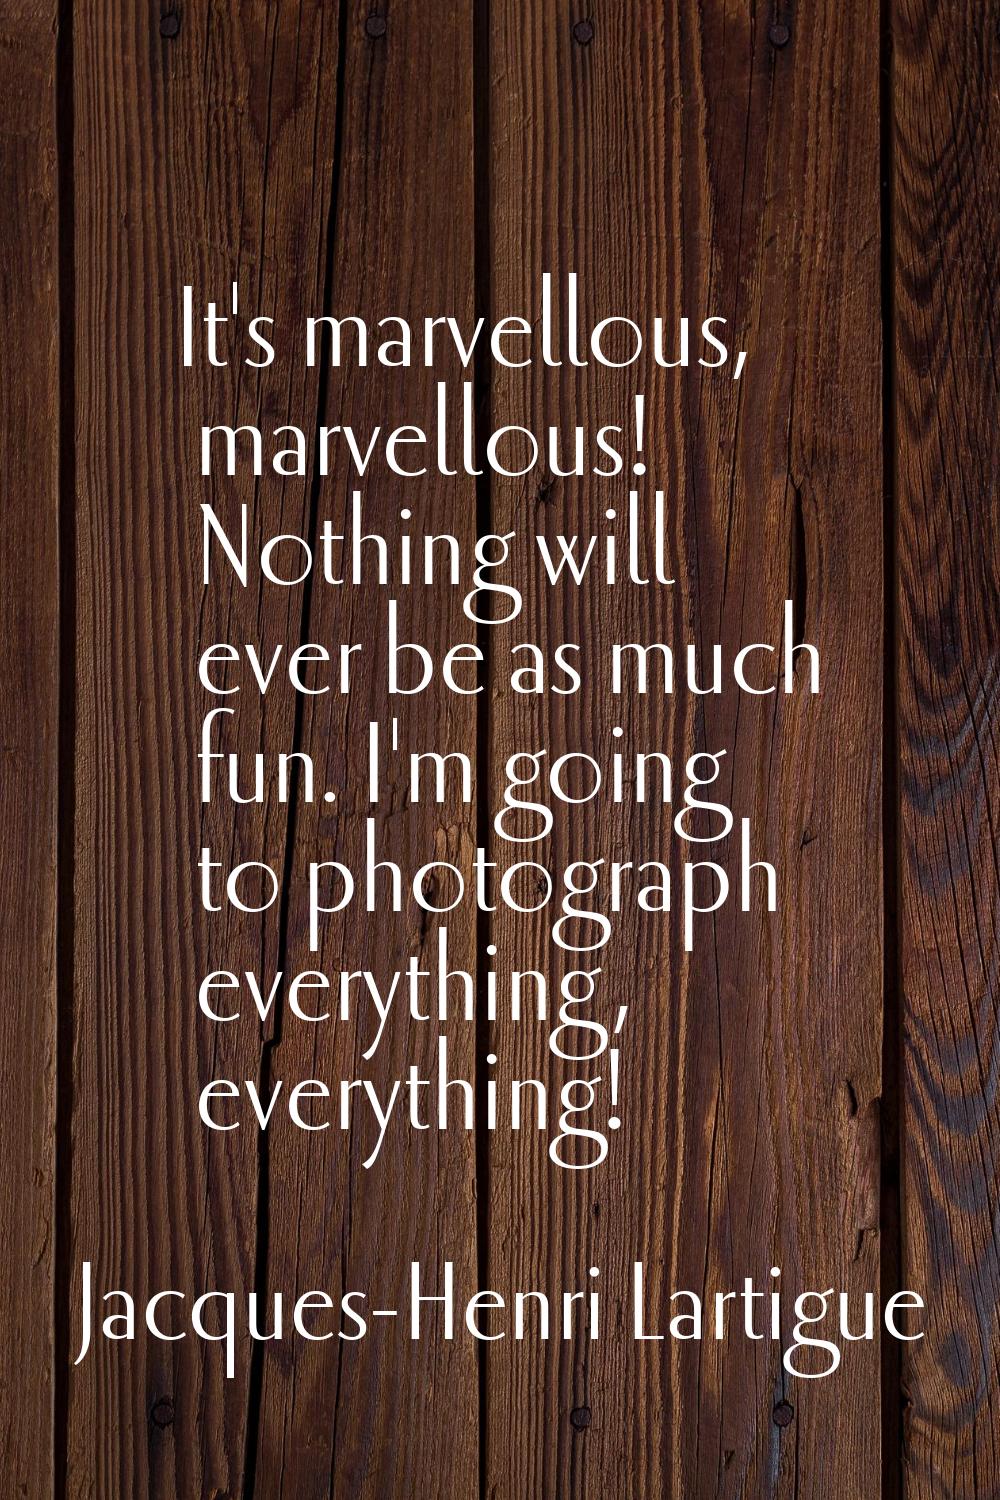 It's marvellous, marvellous! Nothing will ever be as much fun. I'm going to photograph everything, 